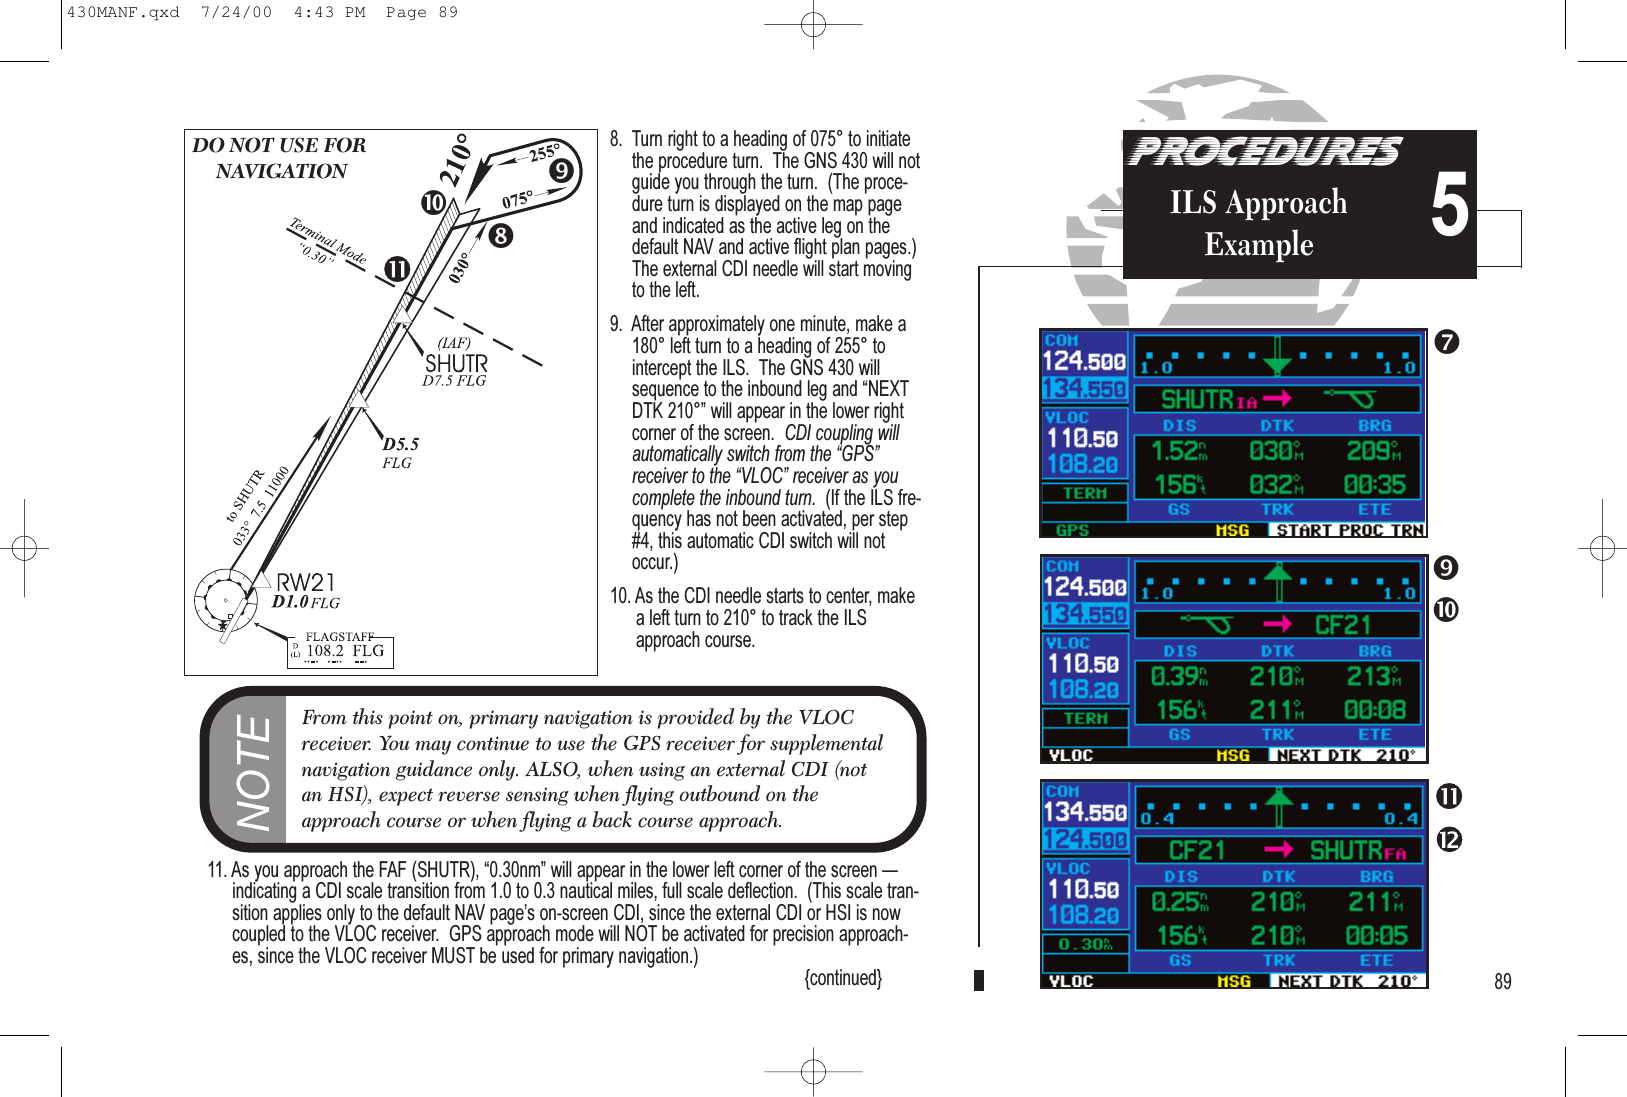 PROCEDURESILS ApproachExample 58.  Turn right to a heading of 075° to initiatethe procedure turn.  The GNS 430 will notguide you through the turn.  (The proce-dure turn is displayed on the map pageand indicated as the active leg on thedefault NAV and active flight plan pages.)The external CDI needle will start movingto the left.9.  After approximately one minute, make a180° left turn to a heading of 255° tointercept the ILS.  The GNS 430 willsequence to the inbound leg and NEXTDTK 210° will appear in the lower rightcorner of the screen.  CDI coupling willautomatically switch from the GPSreceiver to the VLOC receiver as youcomplete the inbound turn.  (If the ILS fre-quency has not been activated, per step#4, this automatic CDI switch will notoccur.)10. As the CDI needle starts to center, makea left turn to 210° to track the ILSapproach course.11. As you approach the FAF (SHUTR), 0.30nm will appear in the lower left corner of the screen indicating a CDI scale transition from 1.0 to 0.3 nautical miles, full scale deflection.  (This scale tran-sition applies only to the default NAV pages on-screen CDI, since the external CDI or HSI is nowcoupled to the VLOC receiver.  GPS approach mode will NOT be activated for precision approach-es, since the VLOC receiver MUST be used for primary navigation.) {continued} 89DO NOT USE FORNAVIGATIONNOTEFrom this point on, primary navigation is provided by the VLOCreceiver. You may continue to use the GPS receiver for supplementalnavigation guidance only. ALSO, when using an external CDI (notan HSI), expect reverse sensing when flying outbound on theapproach course or when flying a back course approach.430MANF.qxd  7/24/00  4:43 PM  Page 89